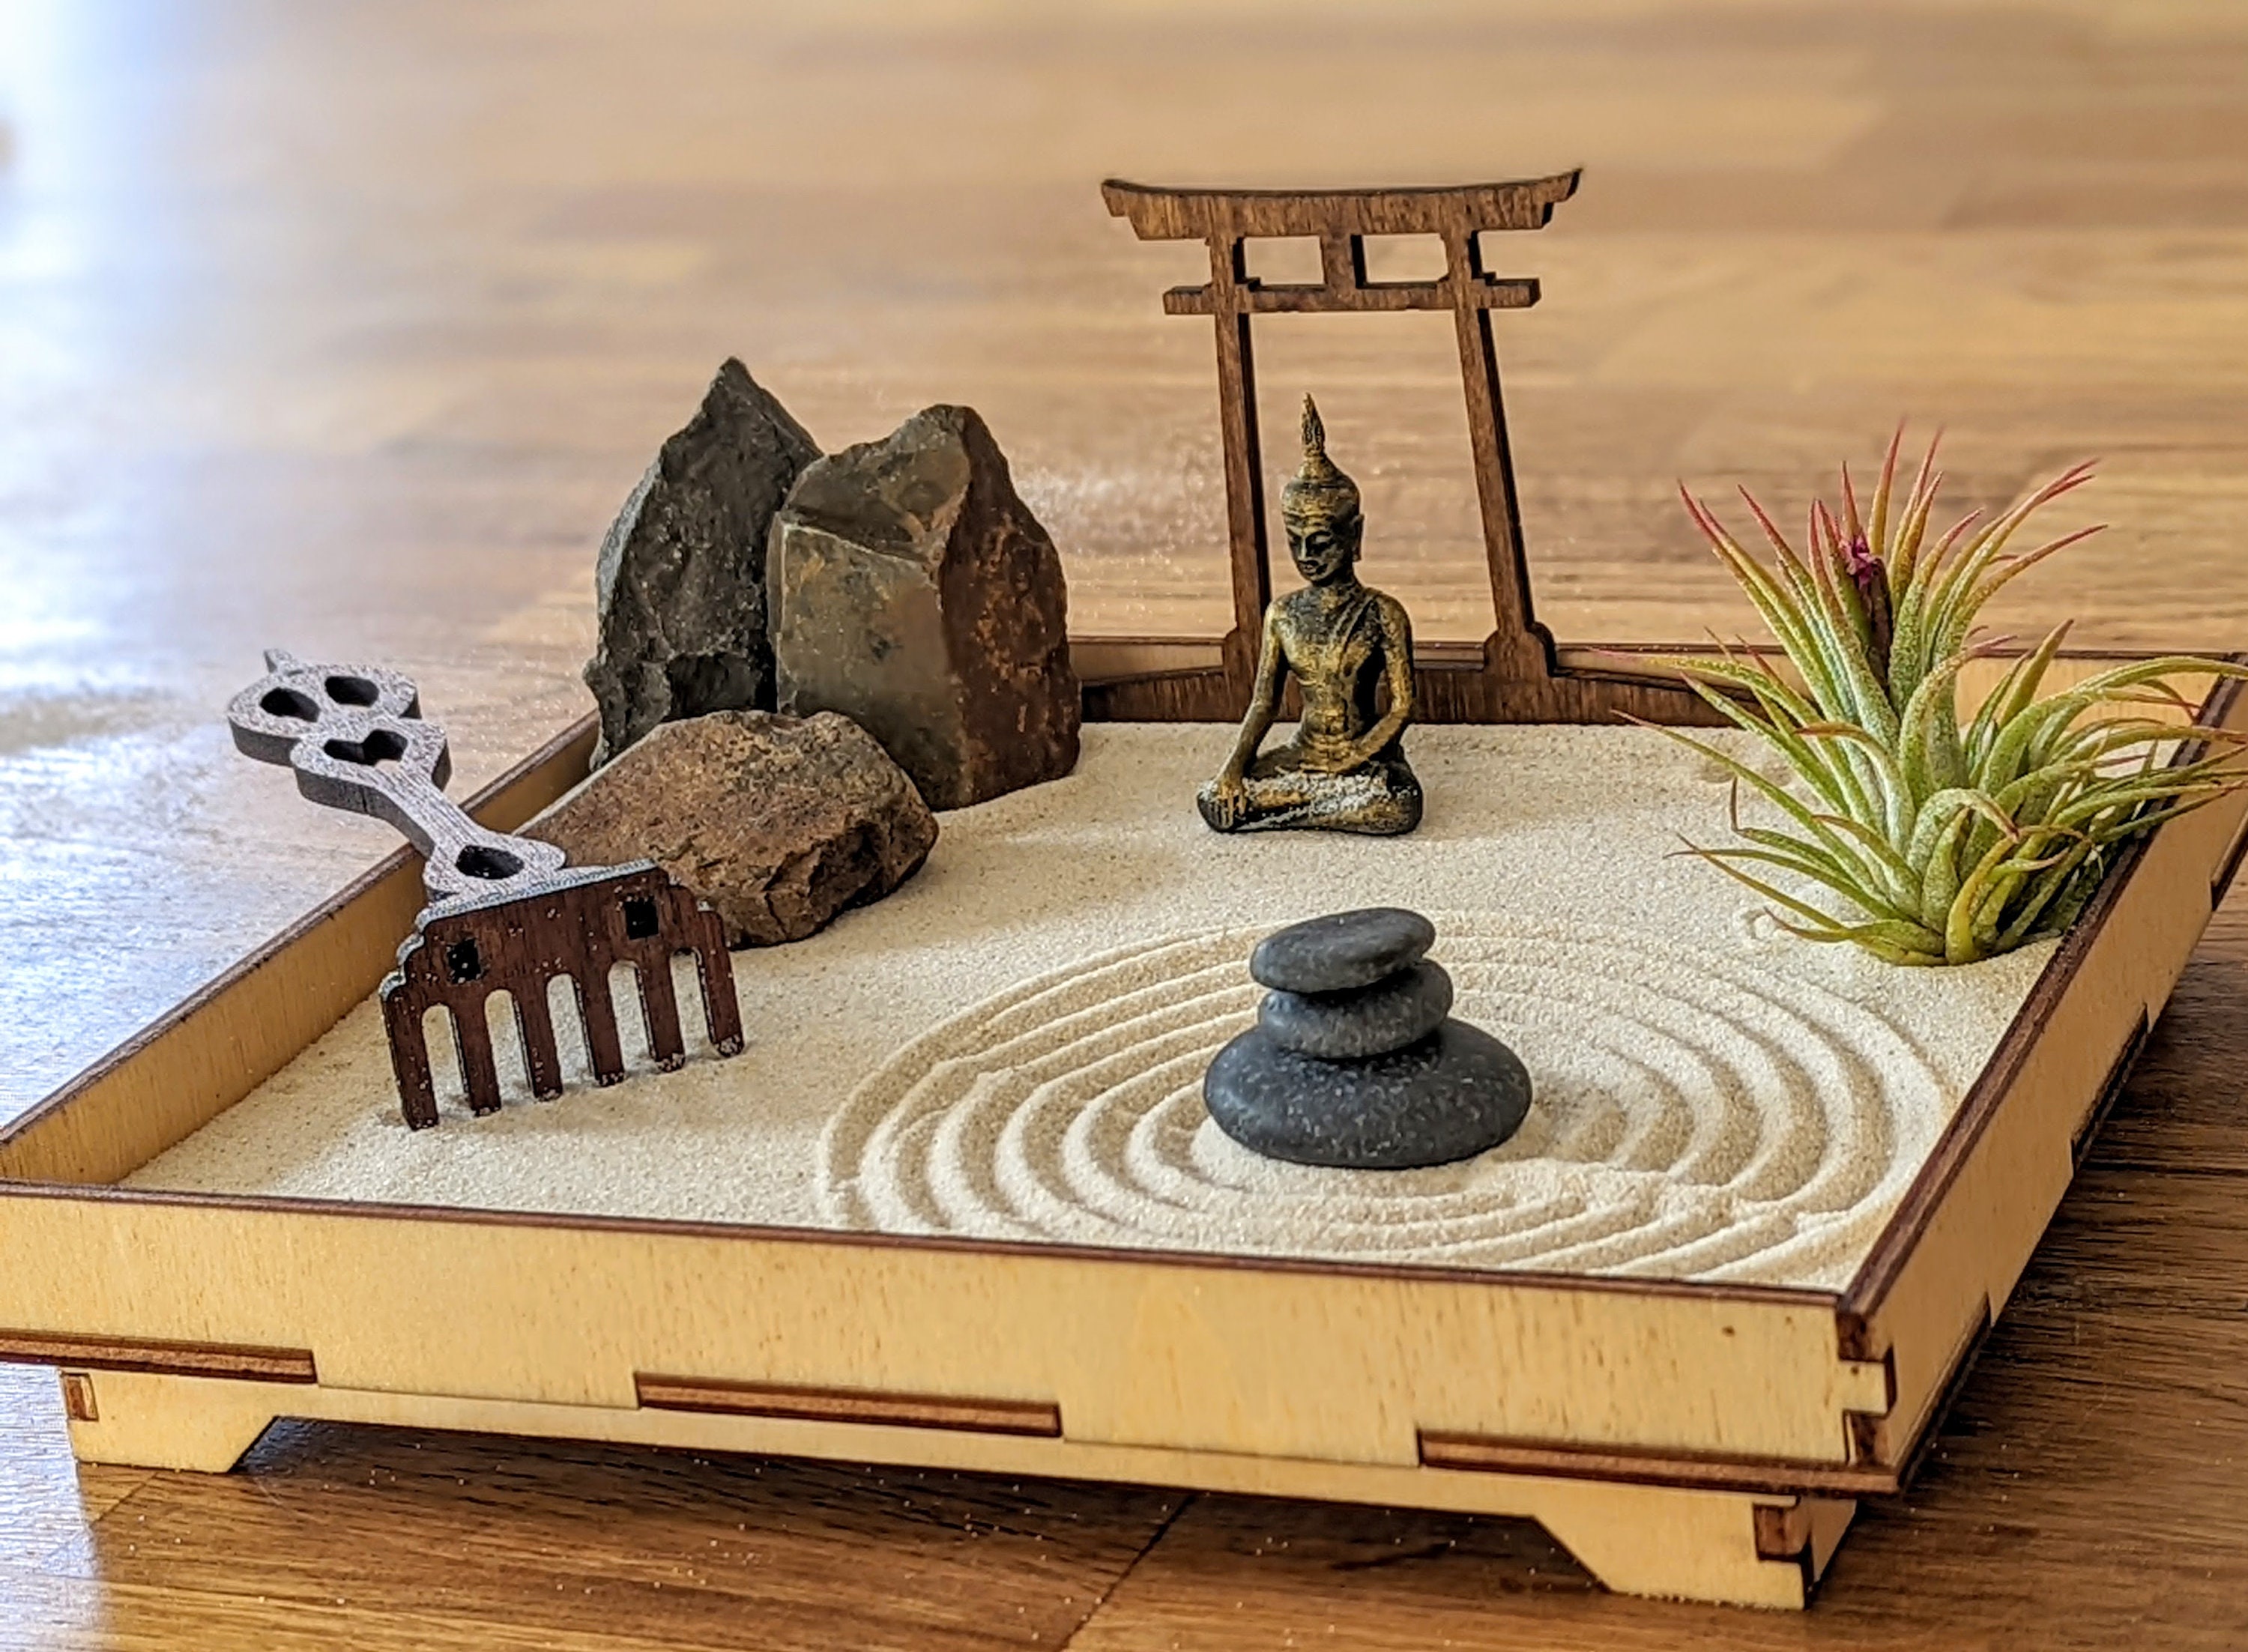 Handmade Zen Garden Set With Buddha Figure, Torii With Rake for Meditation  and Relaxation Sustainable DIY -  Israel